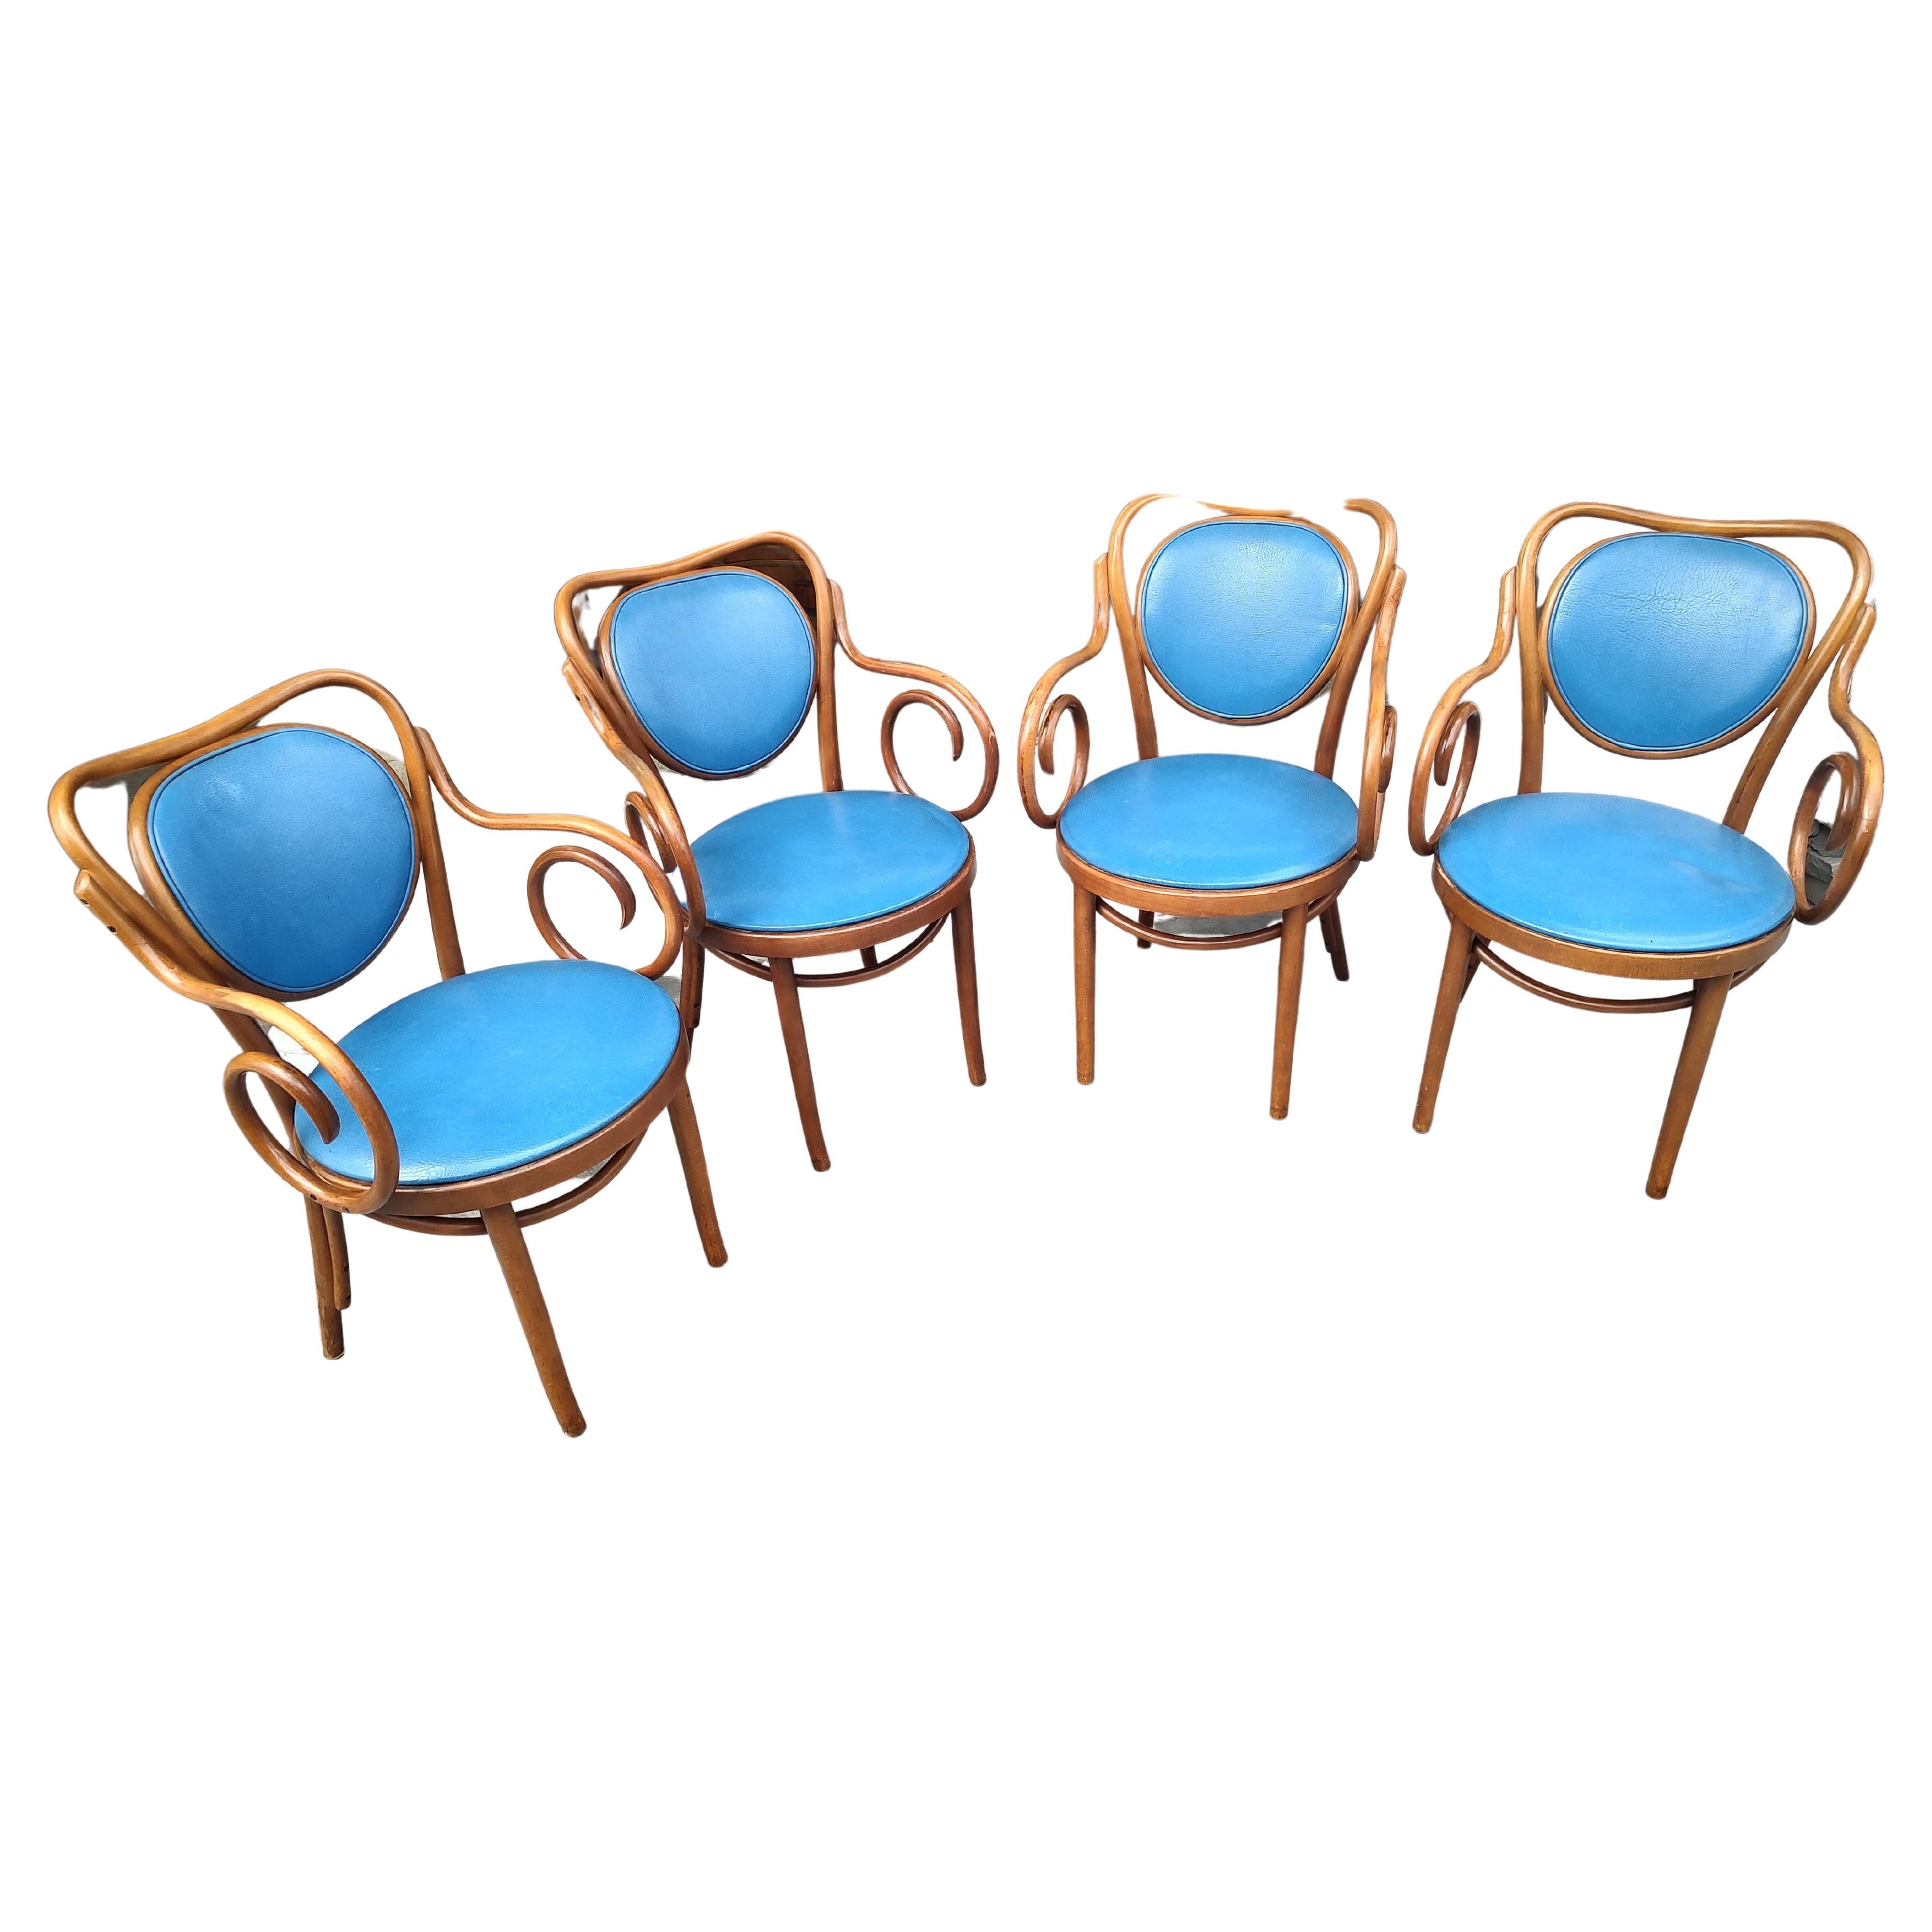 Late 20th Century Mid-Century Set of 4 Thonet Style Bentwood Dining Room Armchairs For Sale